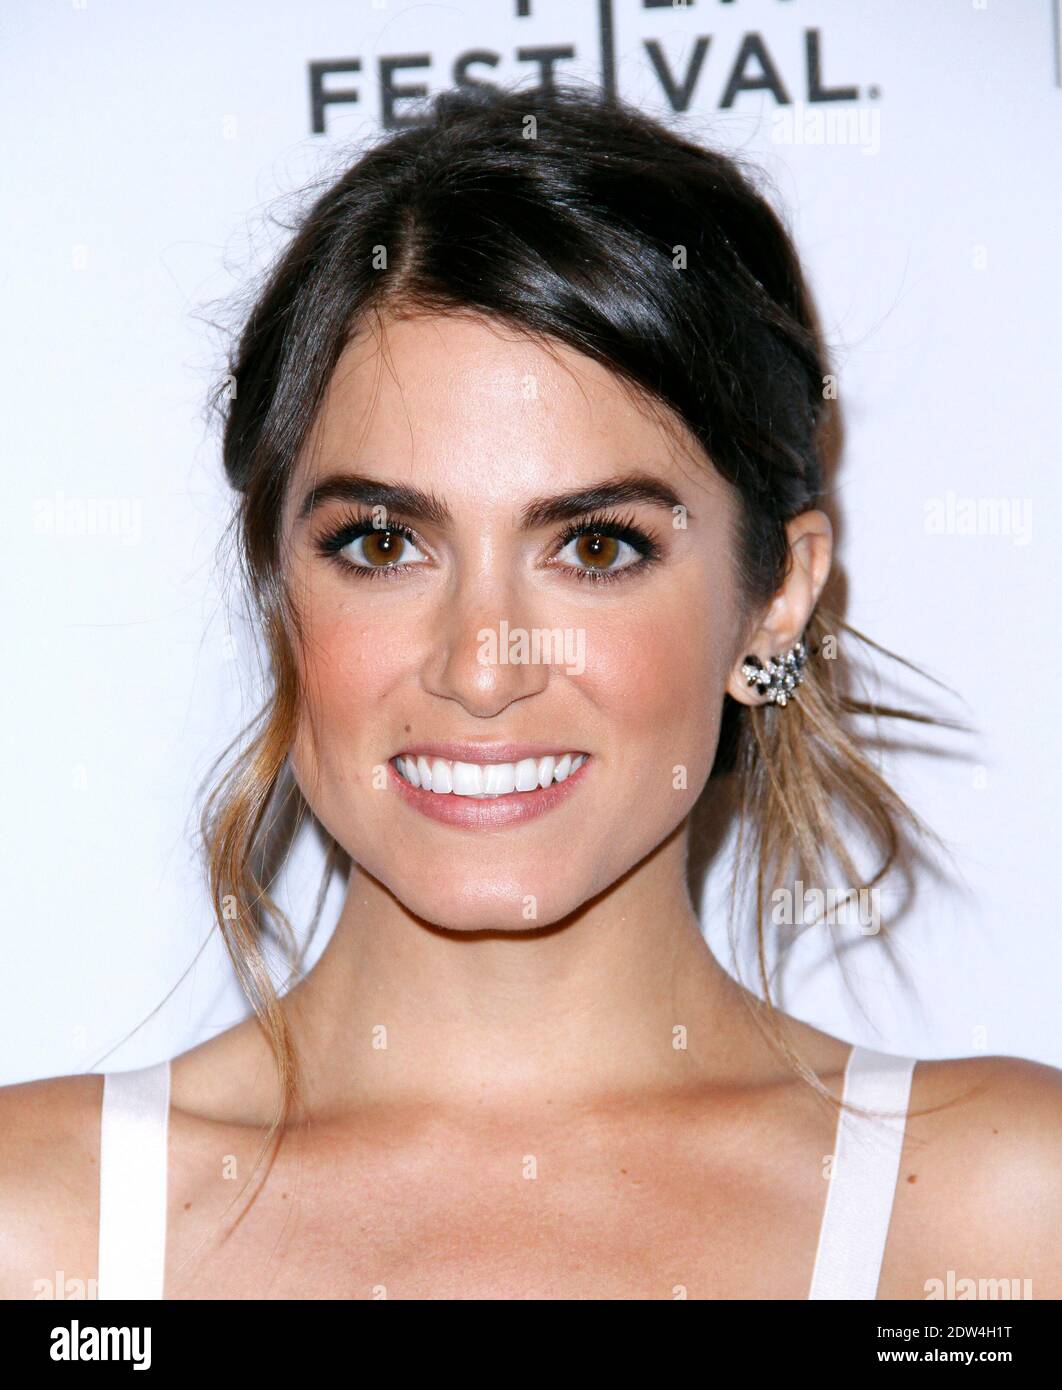 Nikki Reed attends the Intramural premiere during the Tribeca Film Festival at the AMC Loews Village 7 in New York City, NY, USA, on April 21, 2014. Photo by Donna Ward/ABACAPRESS.COM Stock Photo